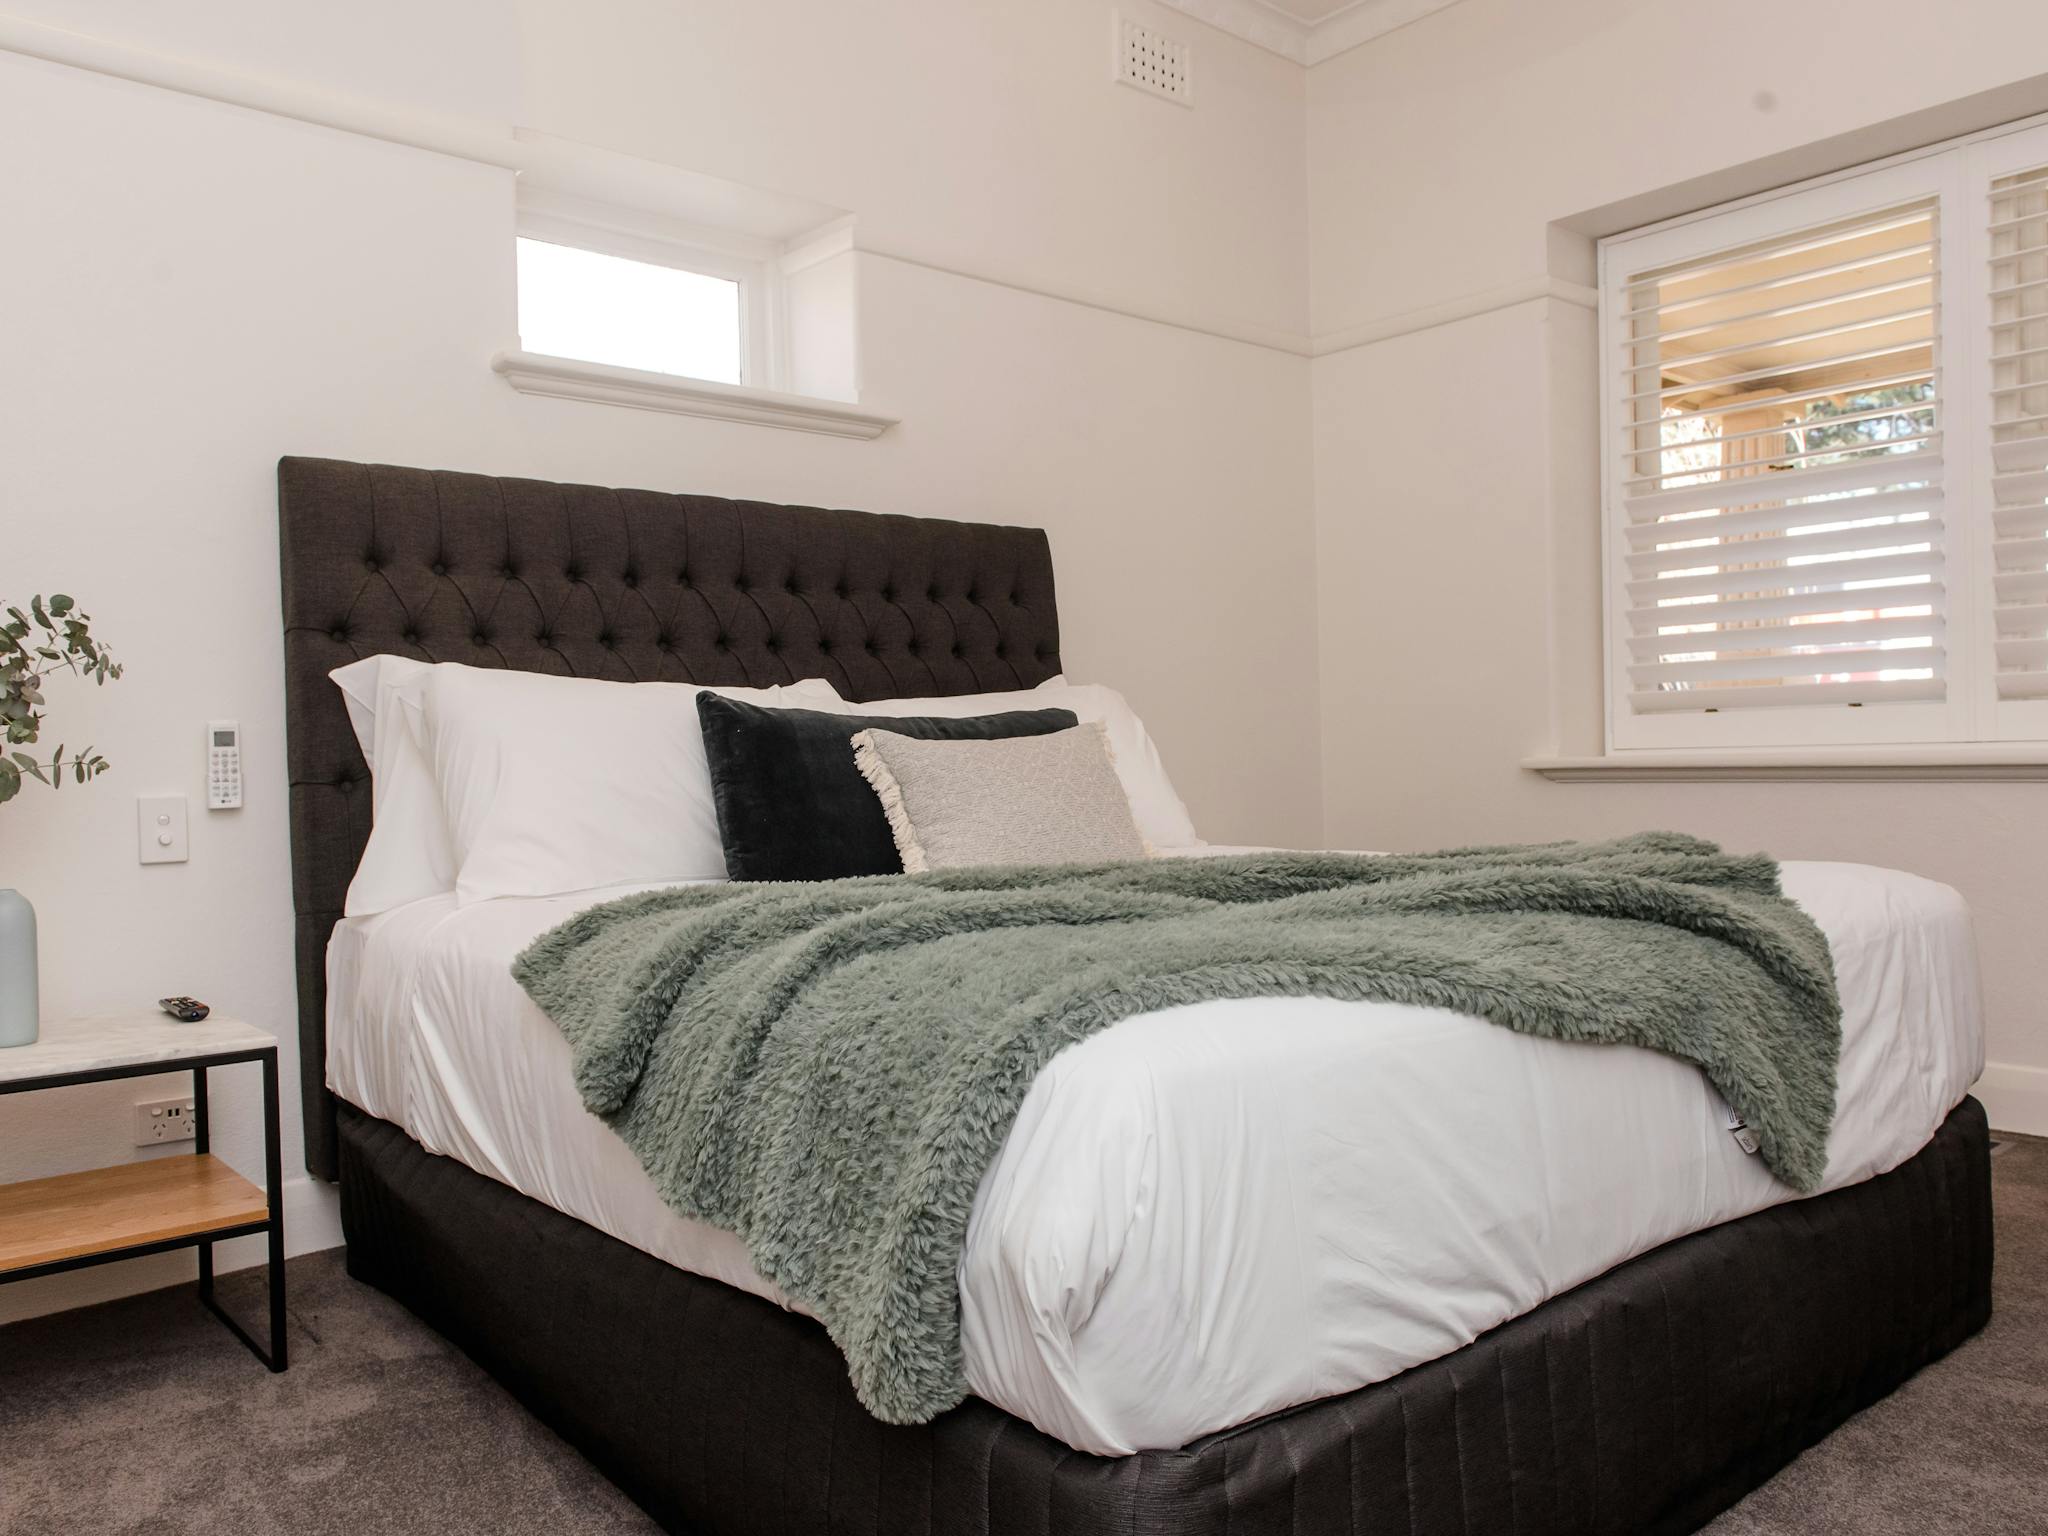 Self contained townhouse bedroom showing comfortable new bed, bedside table and window to verandah